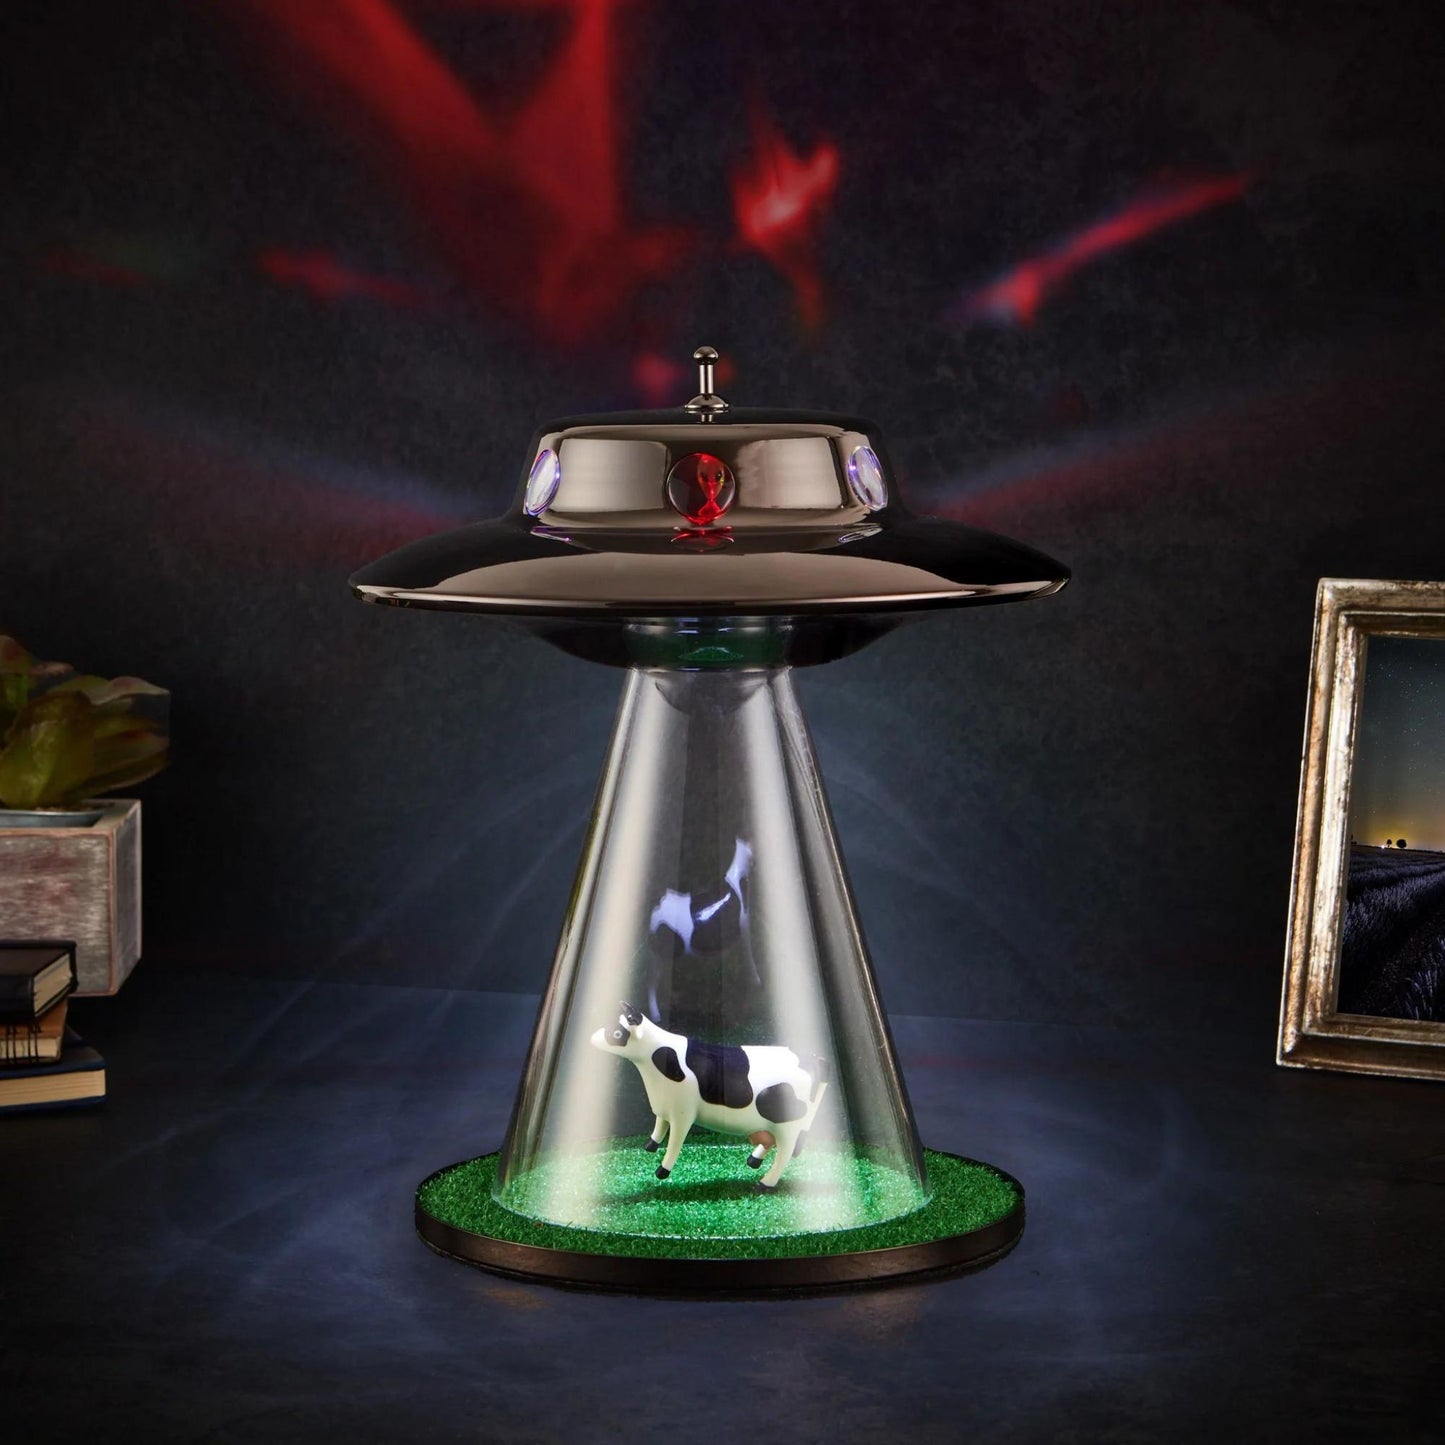 Blue LED - Original UFO Cow Lamp & amazon alien abduction table desk lamp with grass, cow and flying UFO saucer LED RGB night light